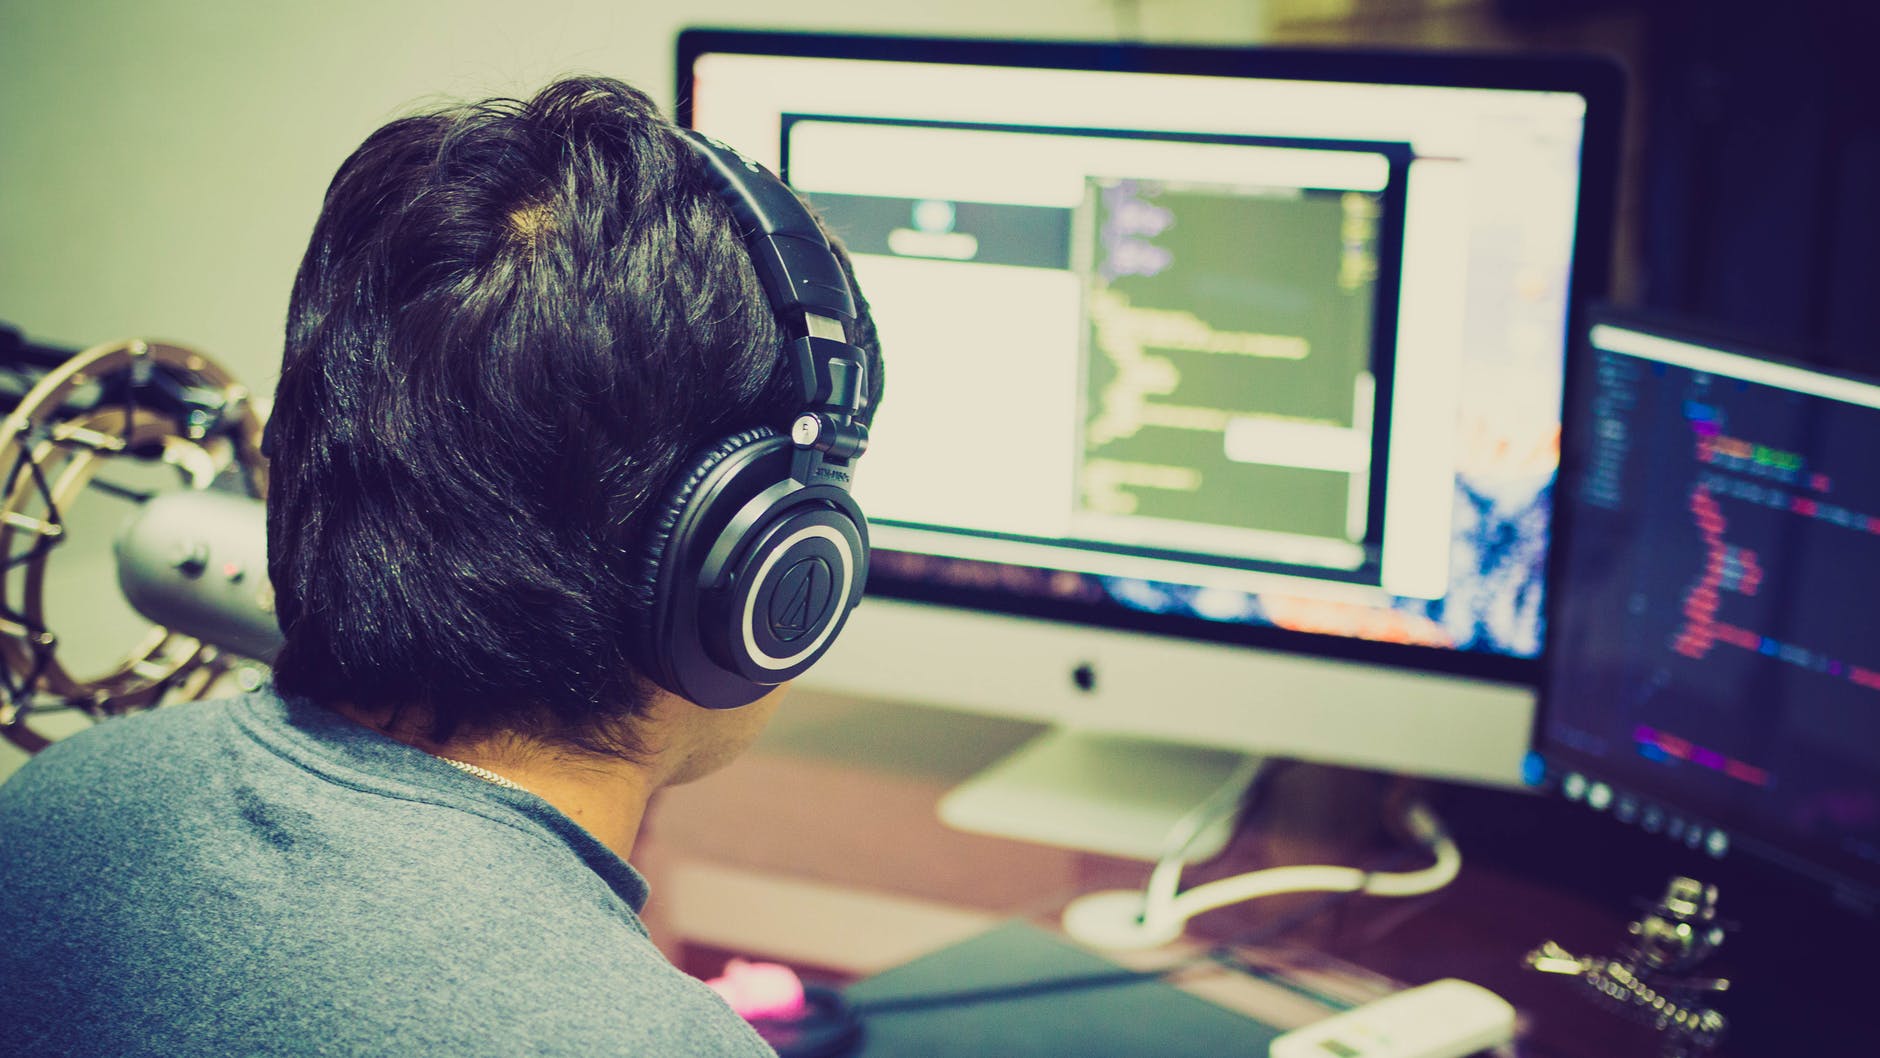 How developers can use rapid user testing to build games that